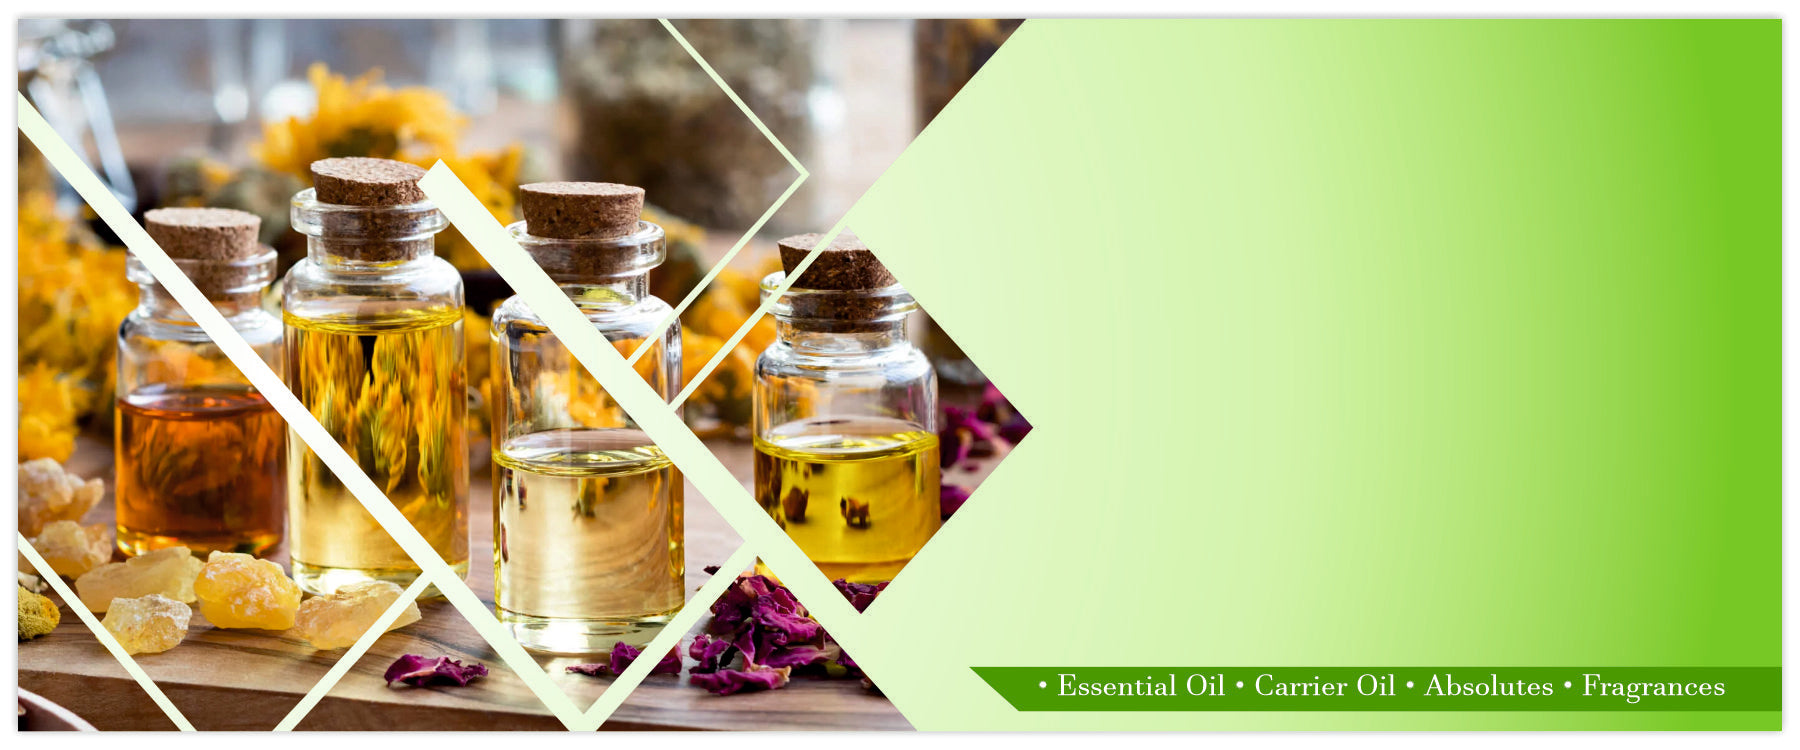 An image of bulk essential oils and carrier oils by Sri Venkatesh Aromas - Wholesale suppliers of bulk essential oils